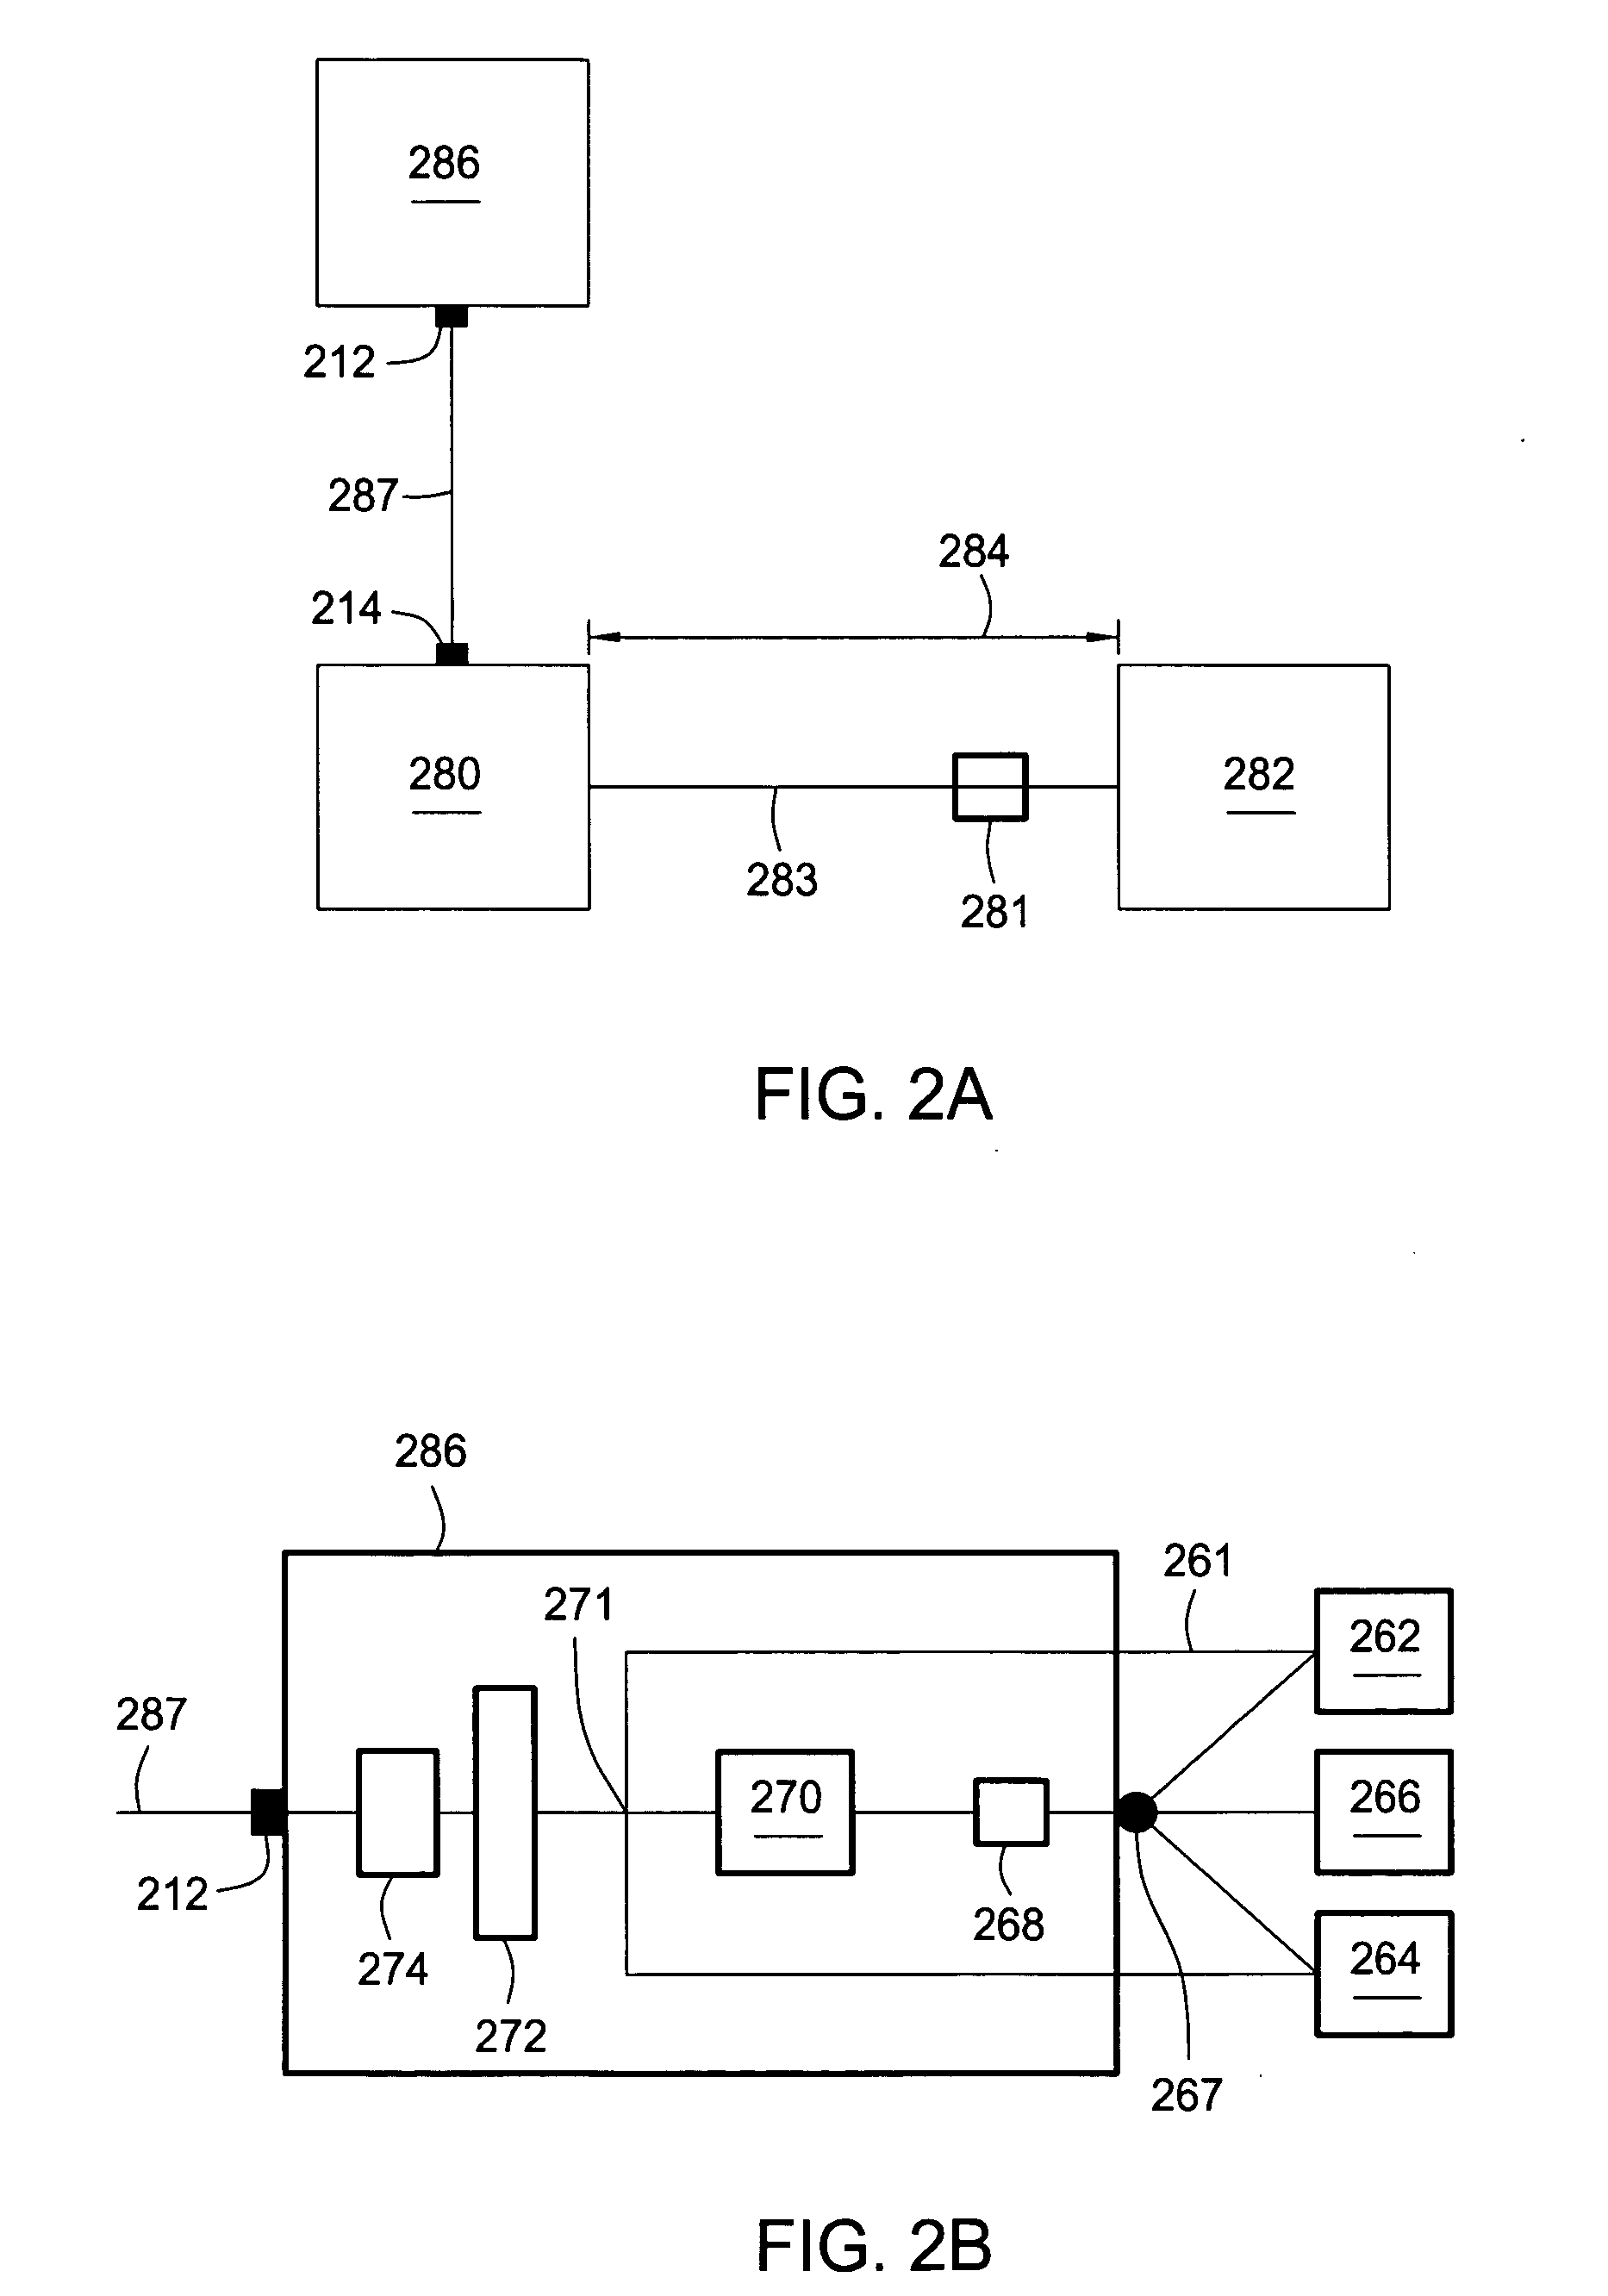 Apparatuses and methods for atomic layer deposition of hafnium-containing high-k dielectric materials